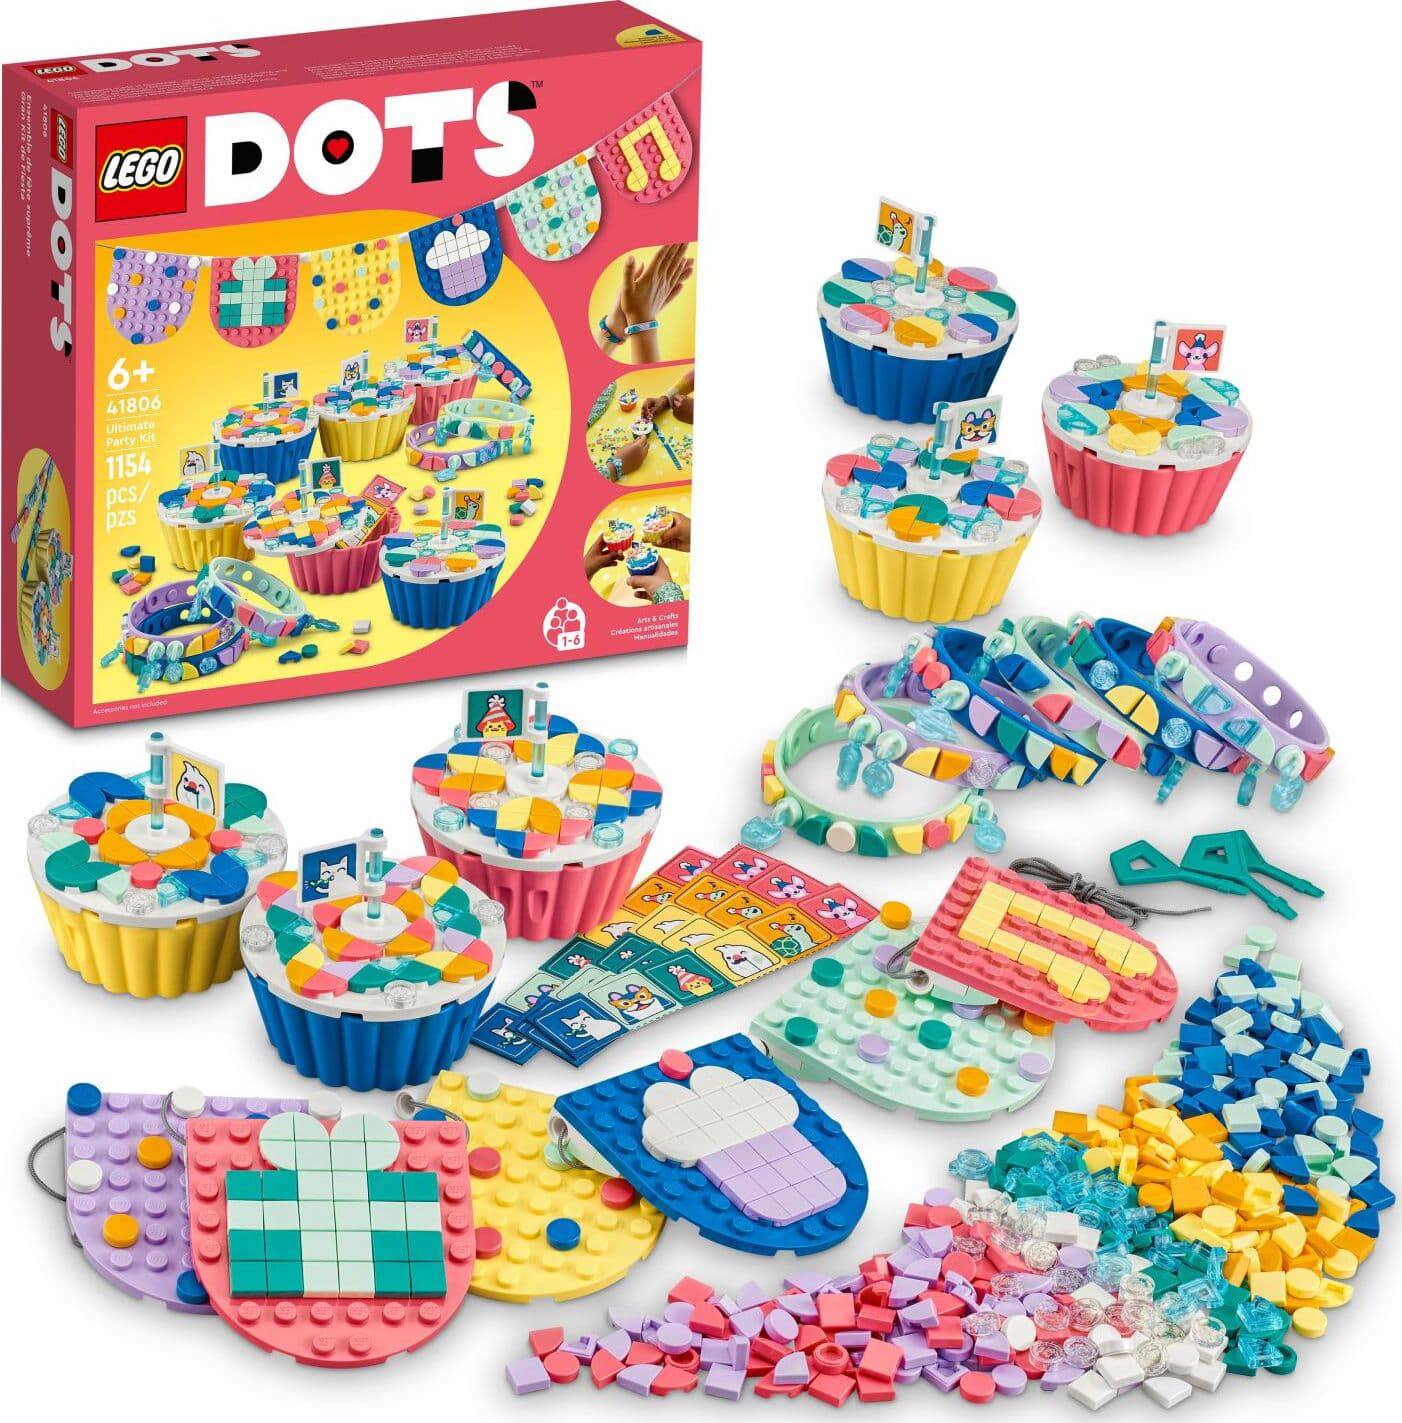 41806 Ultimate Party Kit - A Child's Delight